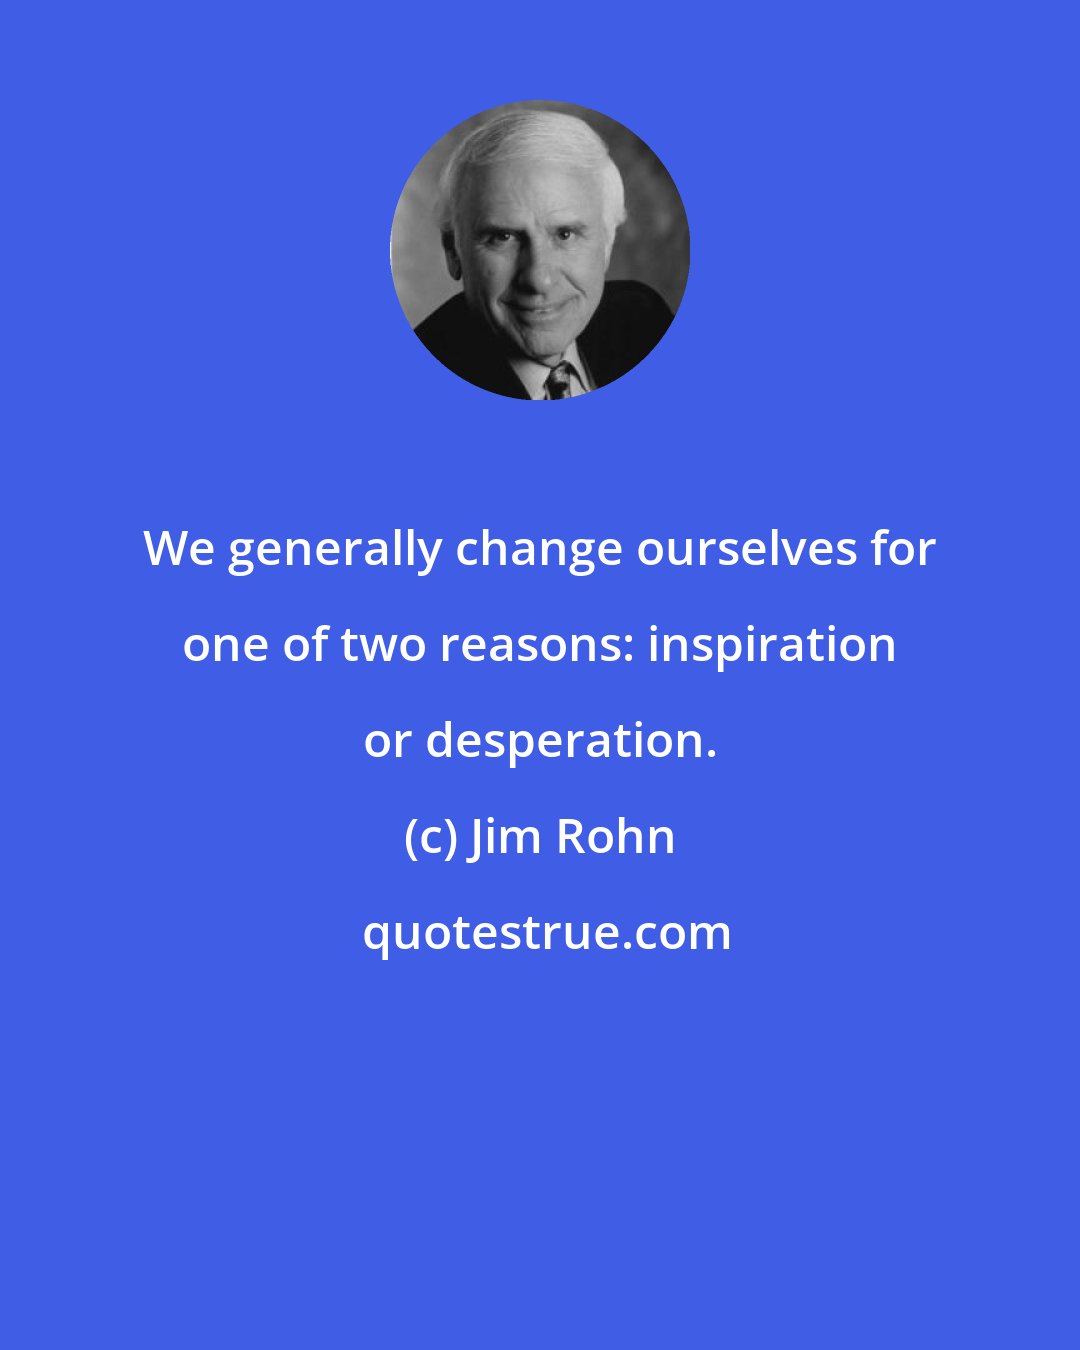 Jim Rohn: We generally change ourselves for one of two reasons: inspiration or desperation.